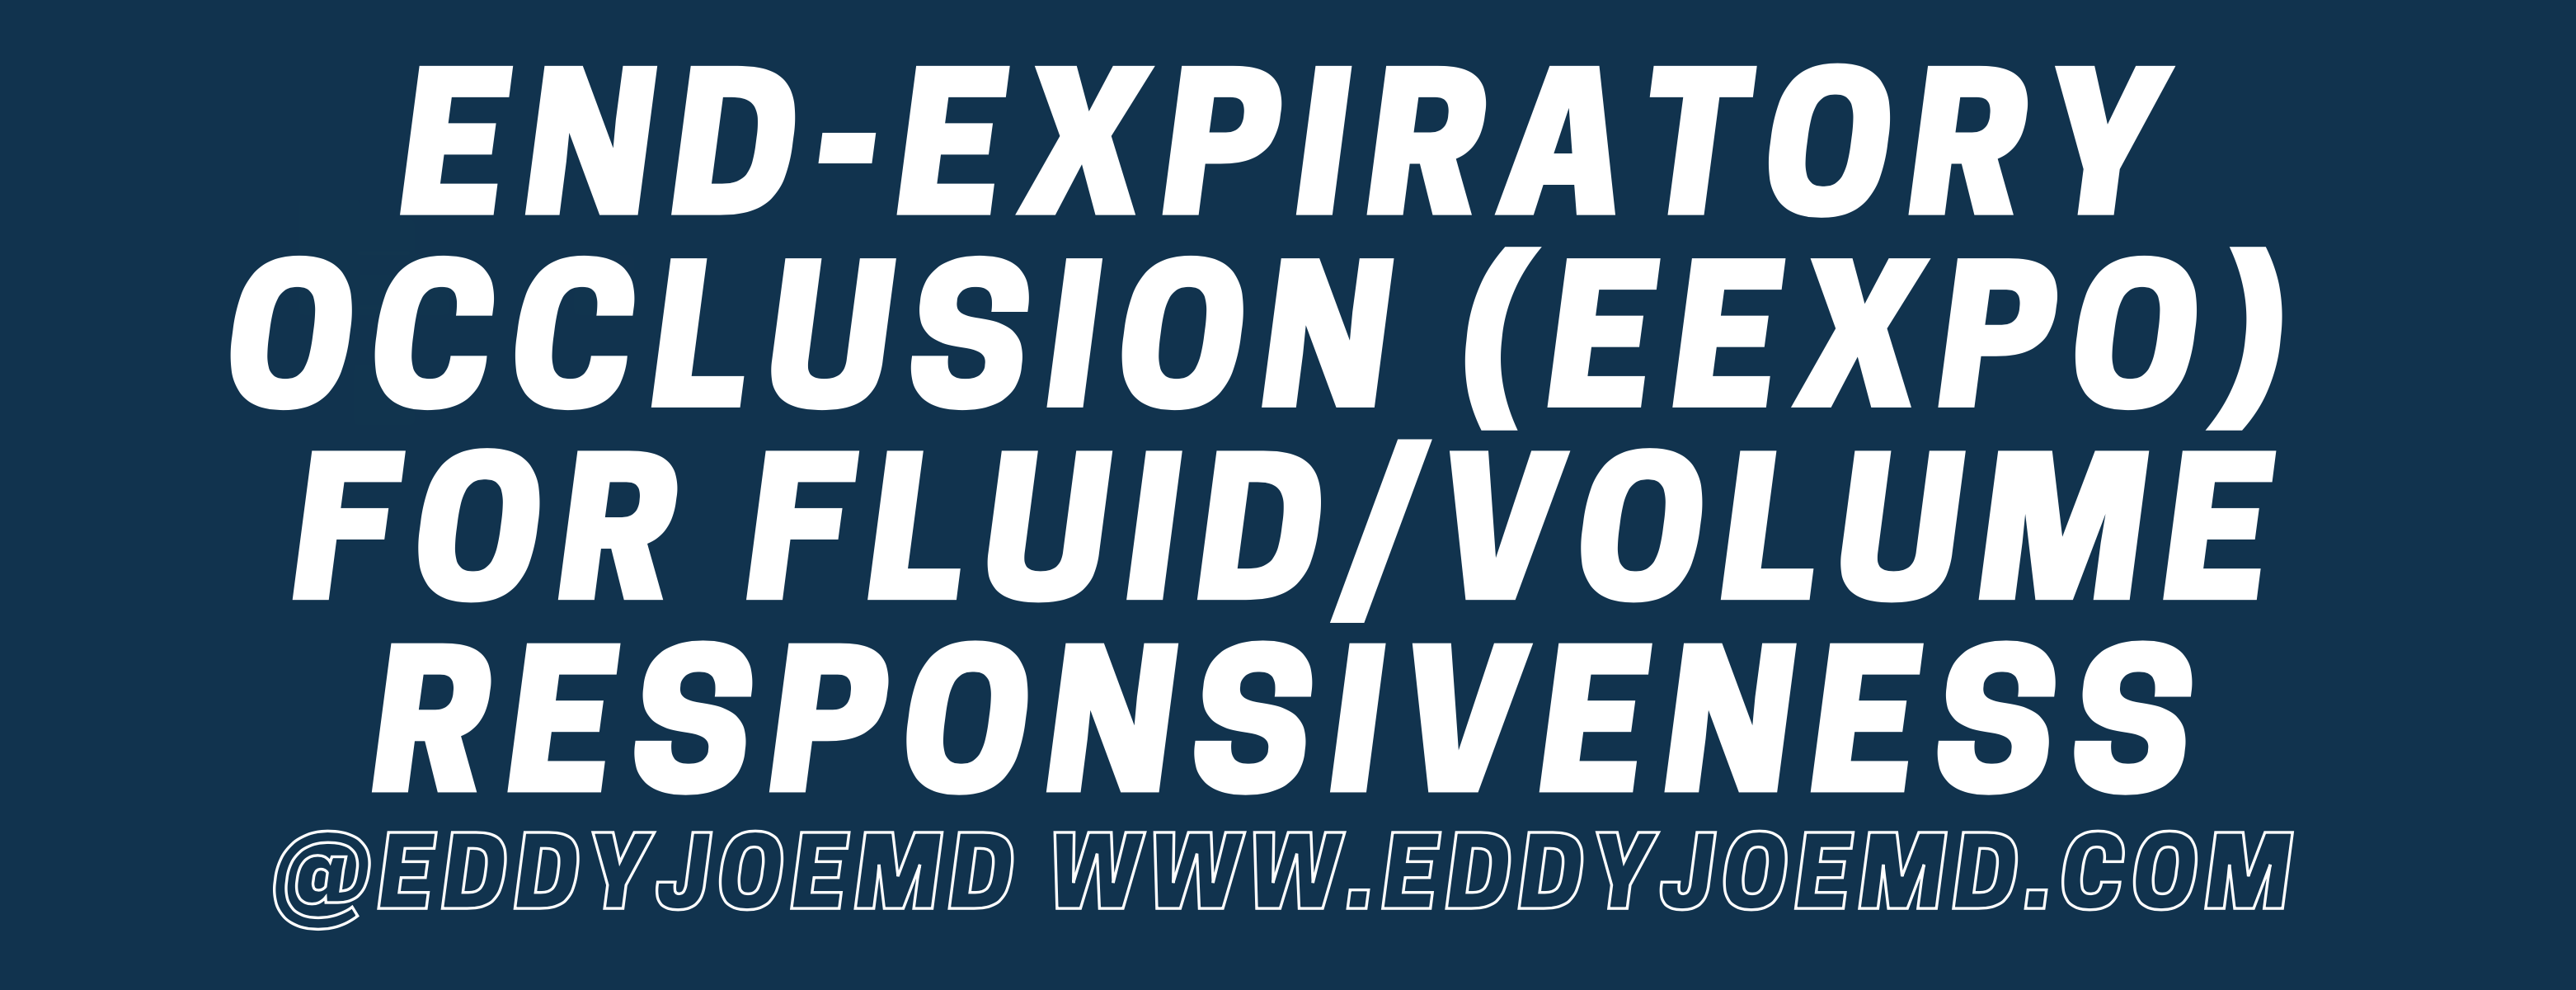 End-Expiratory Occlusion (EEXPO) for Fluid/Volume Responsiveness